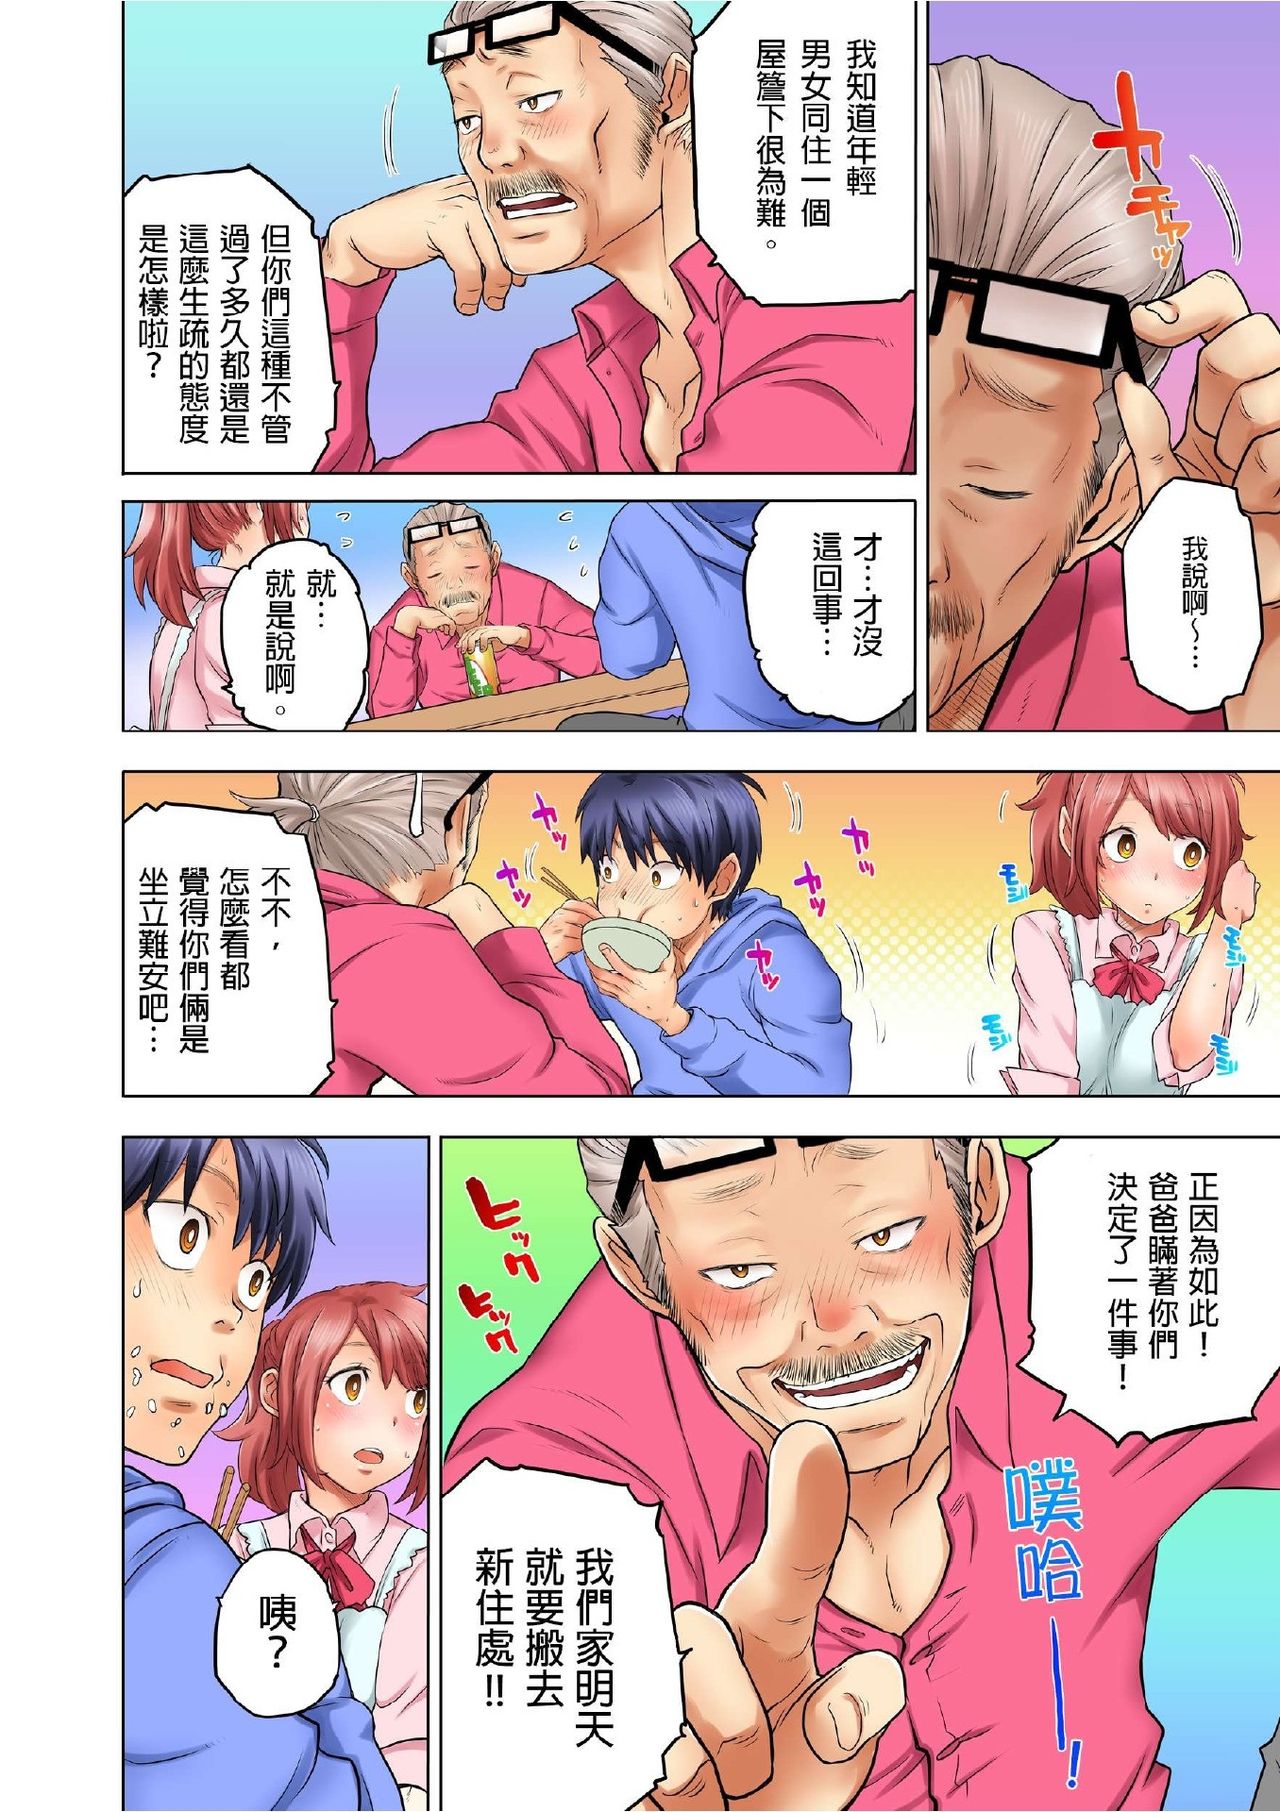 [Hisashi Ryuuto] My Classmate is My Dad's Bride, But in Bed She's Mine. [Chinese] [Ch.1-15] (Ongoing) [りゅうとひさし] 同級生は親父の嫁。ベッドの上では俺の嫁。 [中国翻訳] [Ch.1-15] [進行中]